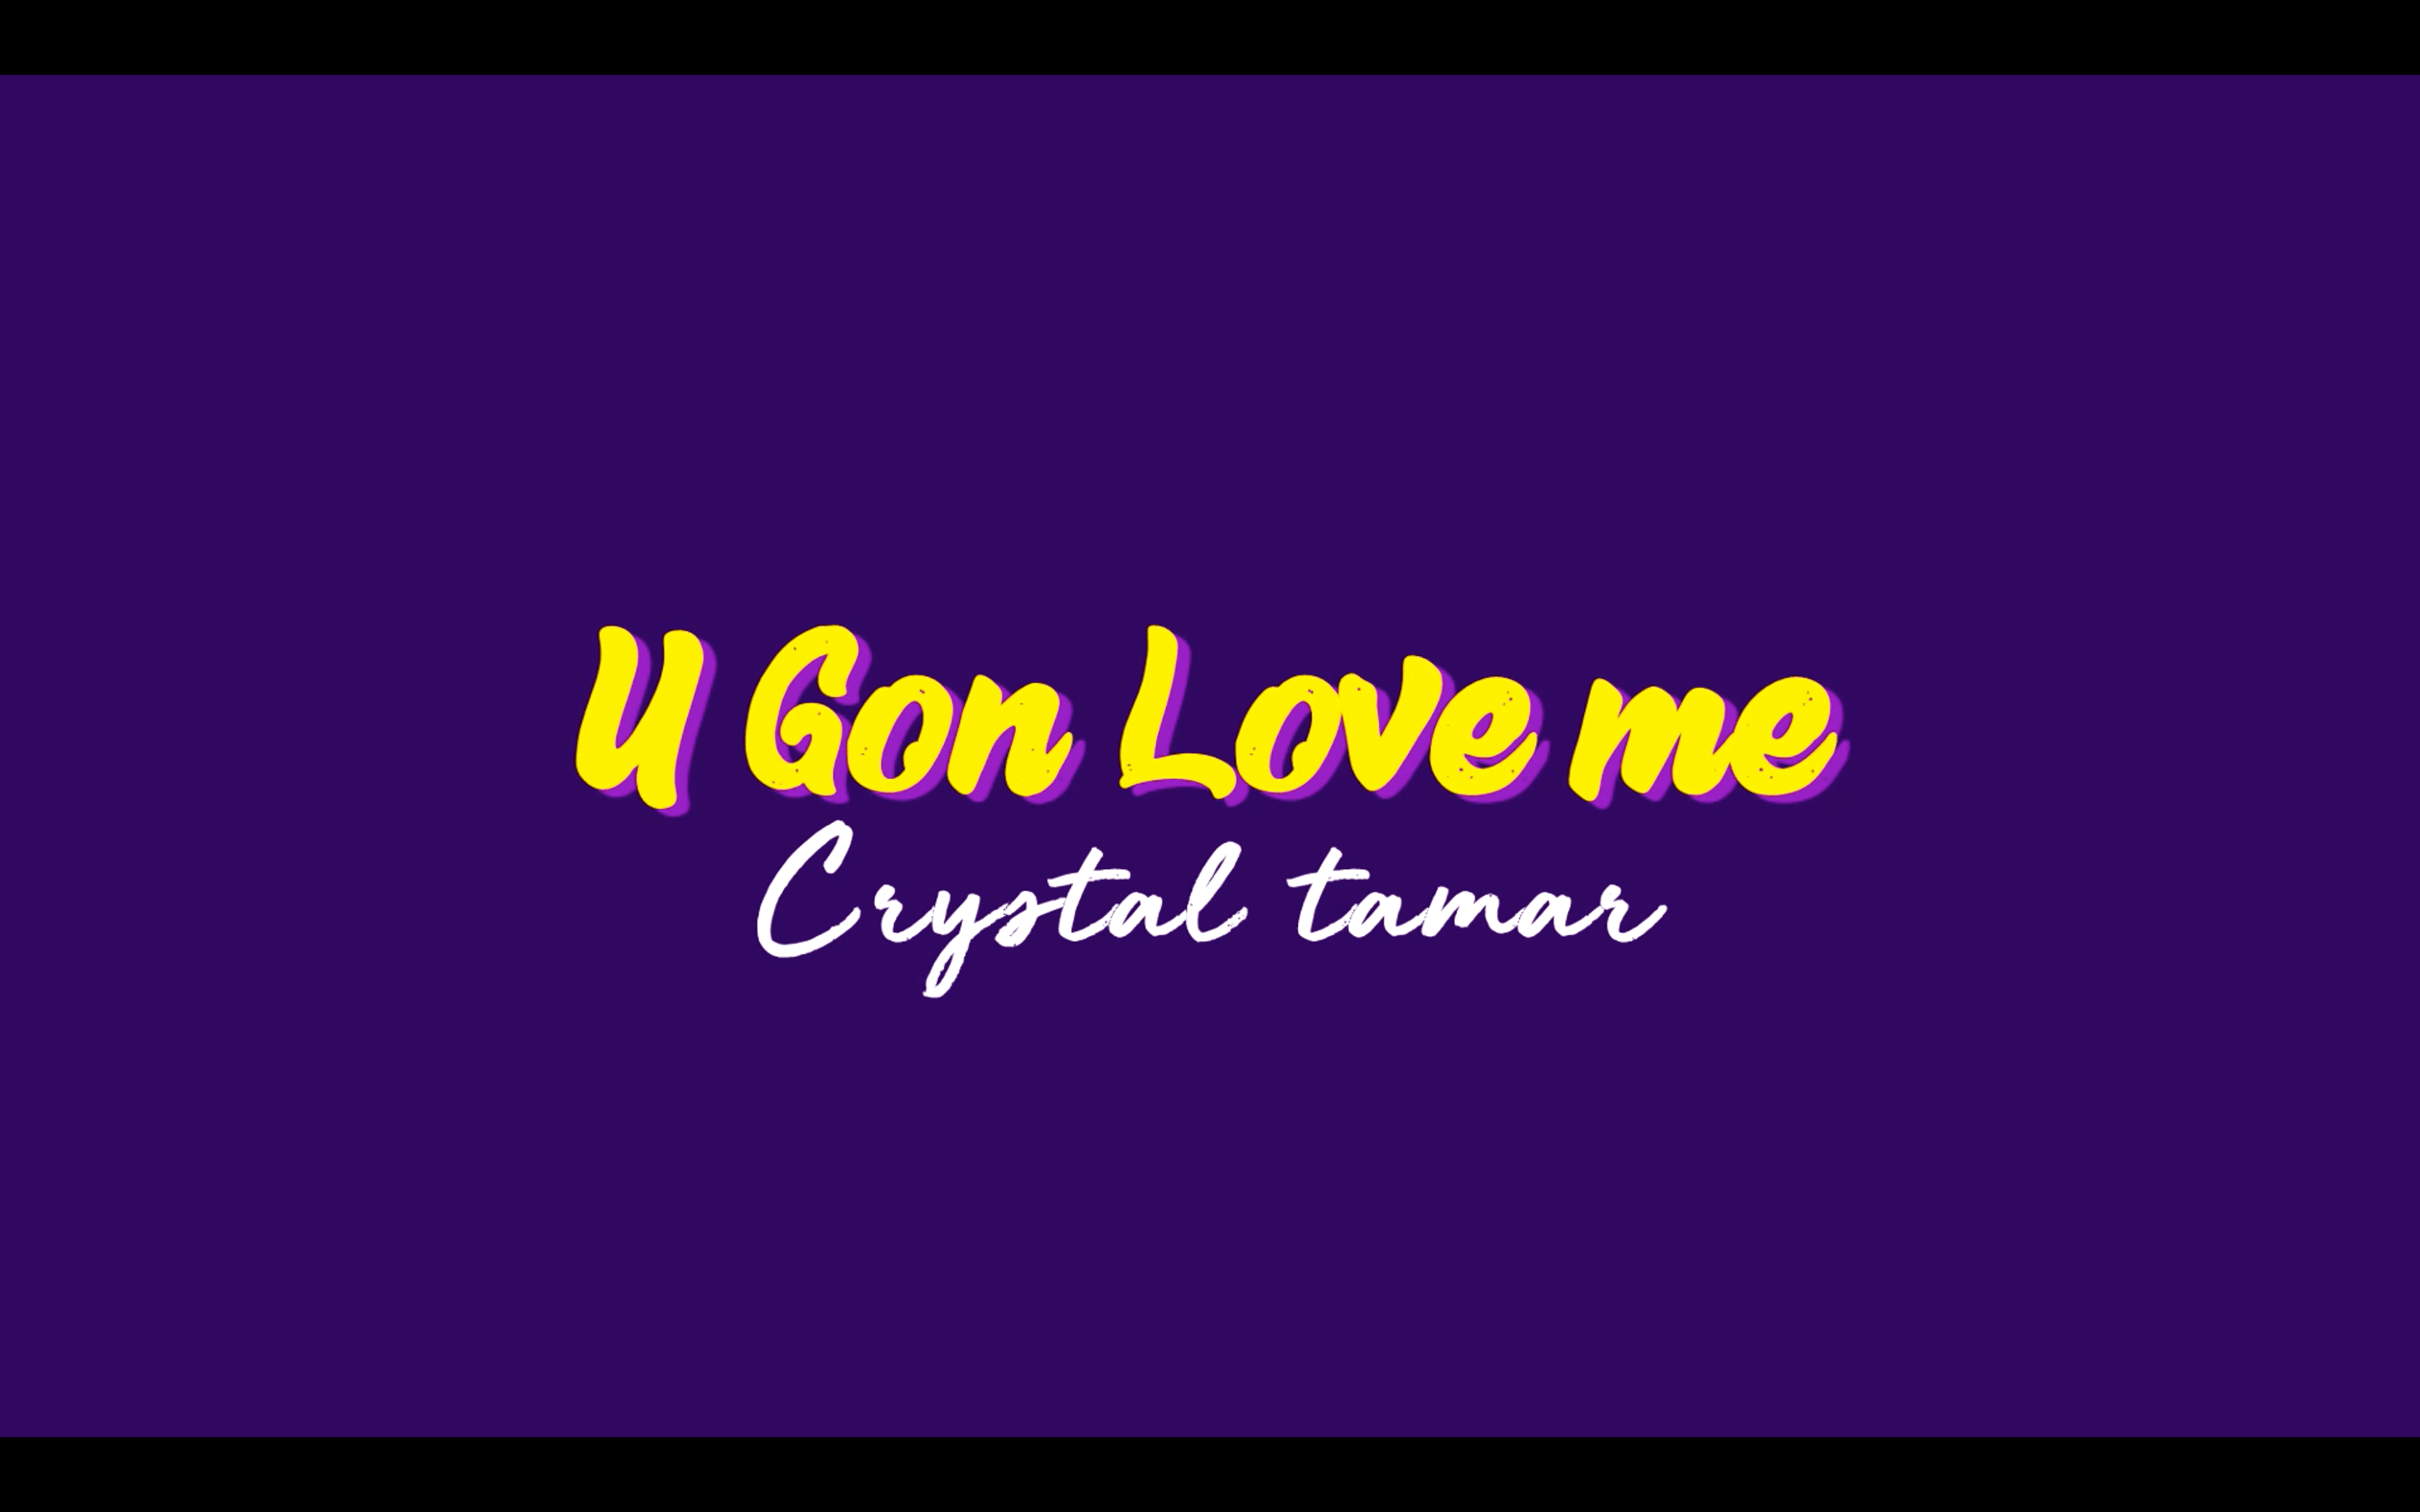 Lyric Video for U Gon Love Me by Crystal Tamar (Produced by Bangladesh))